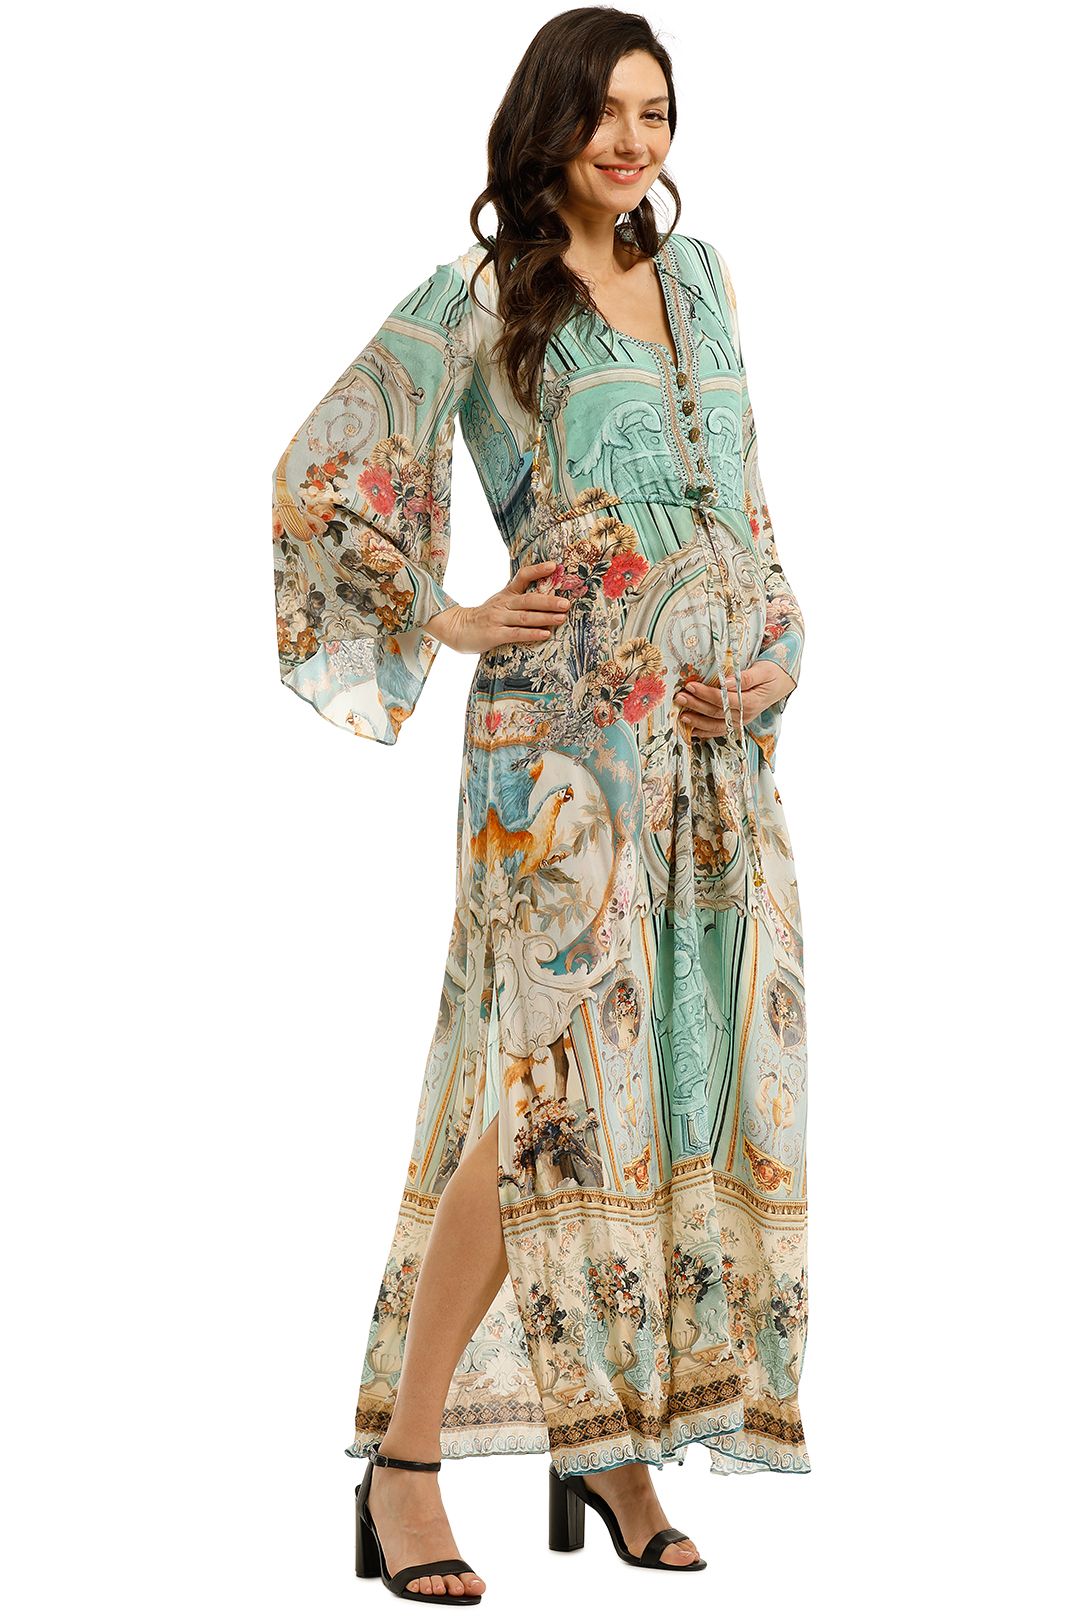 Camilla-Drawstring-Button-Up-Dress-Dream-of-Marie-Side